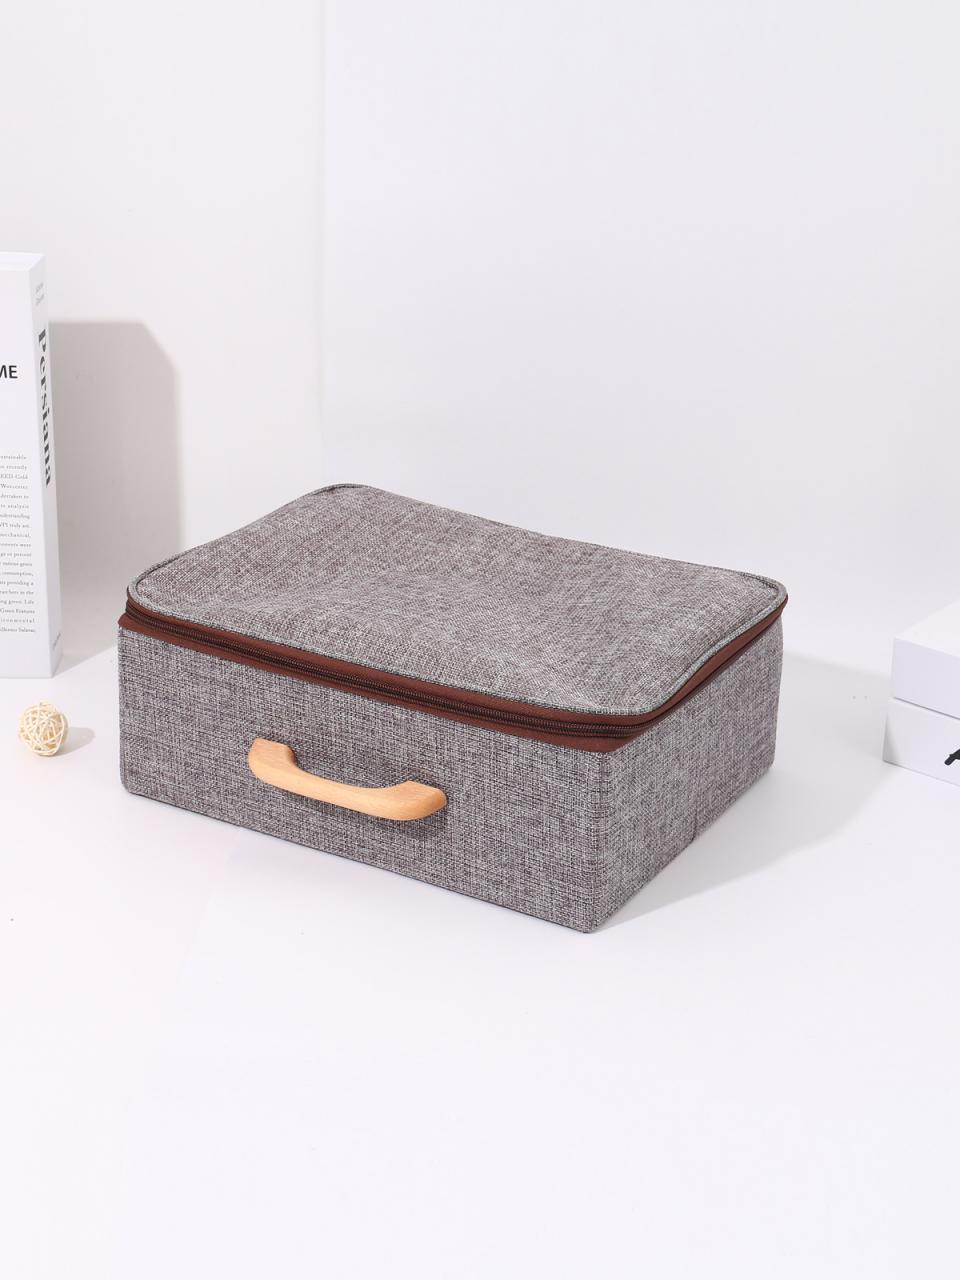 Buy Grey SmallSized Zippered Storage Box with Wooden Handle for Men